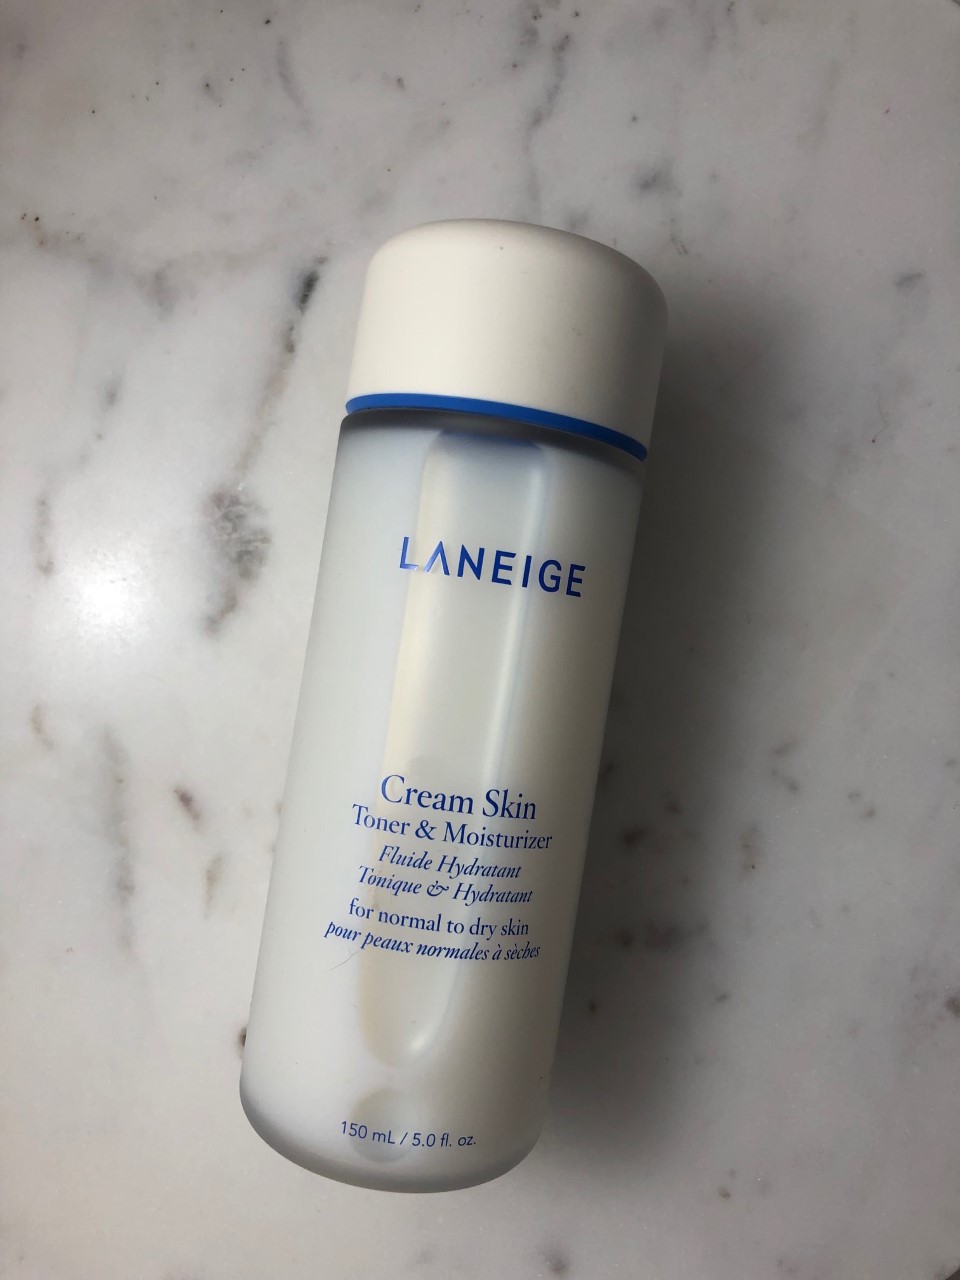 Laneige Cream Skin Toner and Moisturizer: A quick review